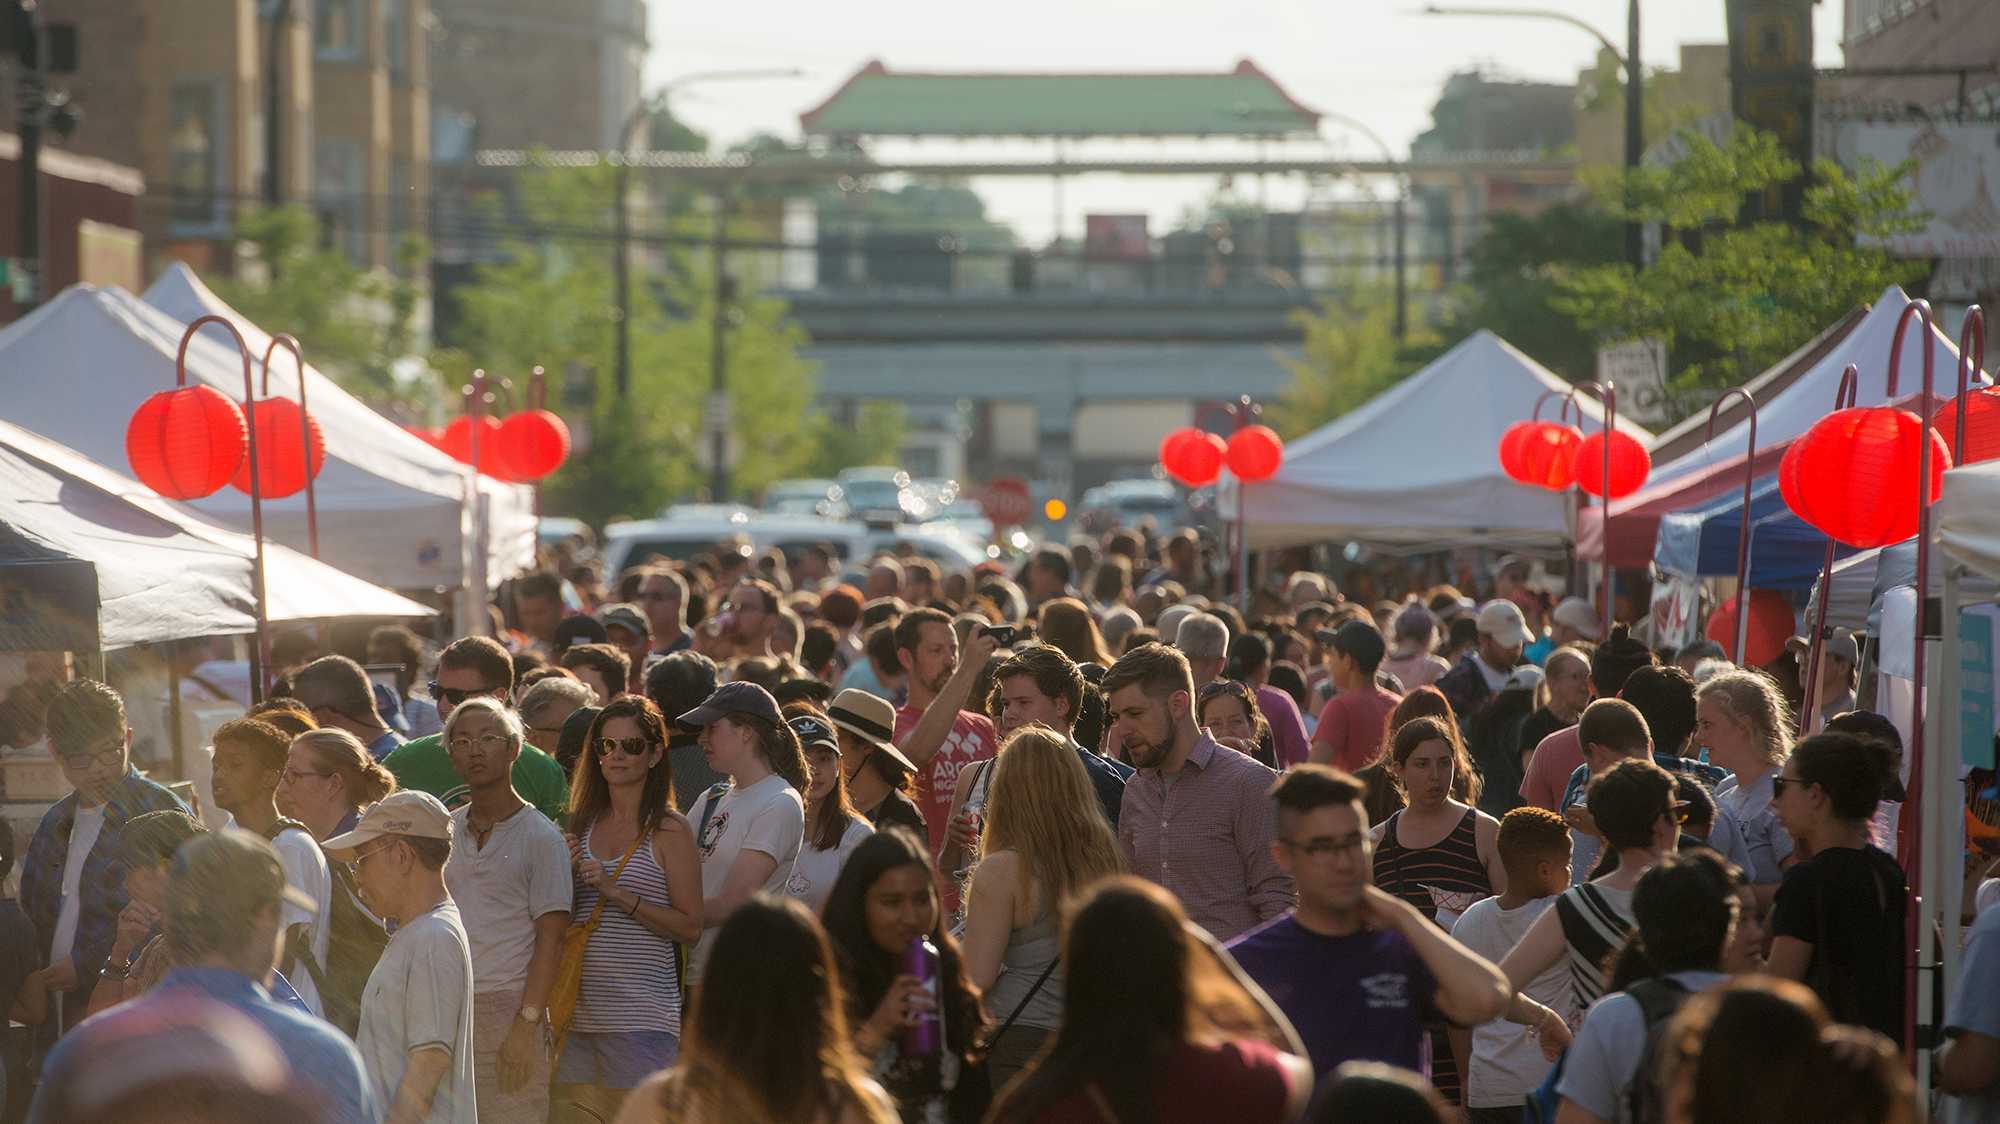 Crowd of people at a festival in Chicago